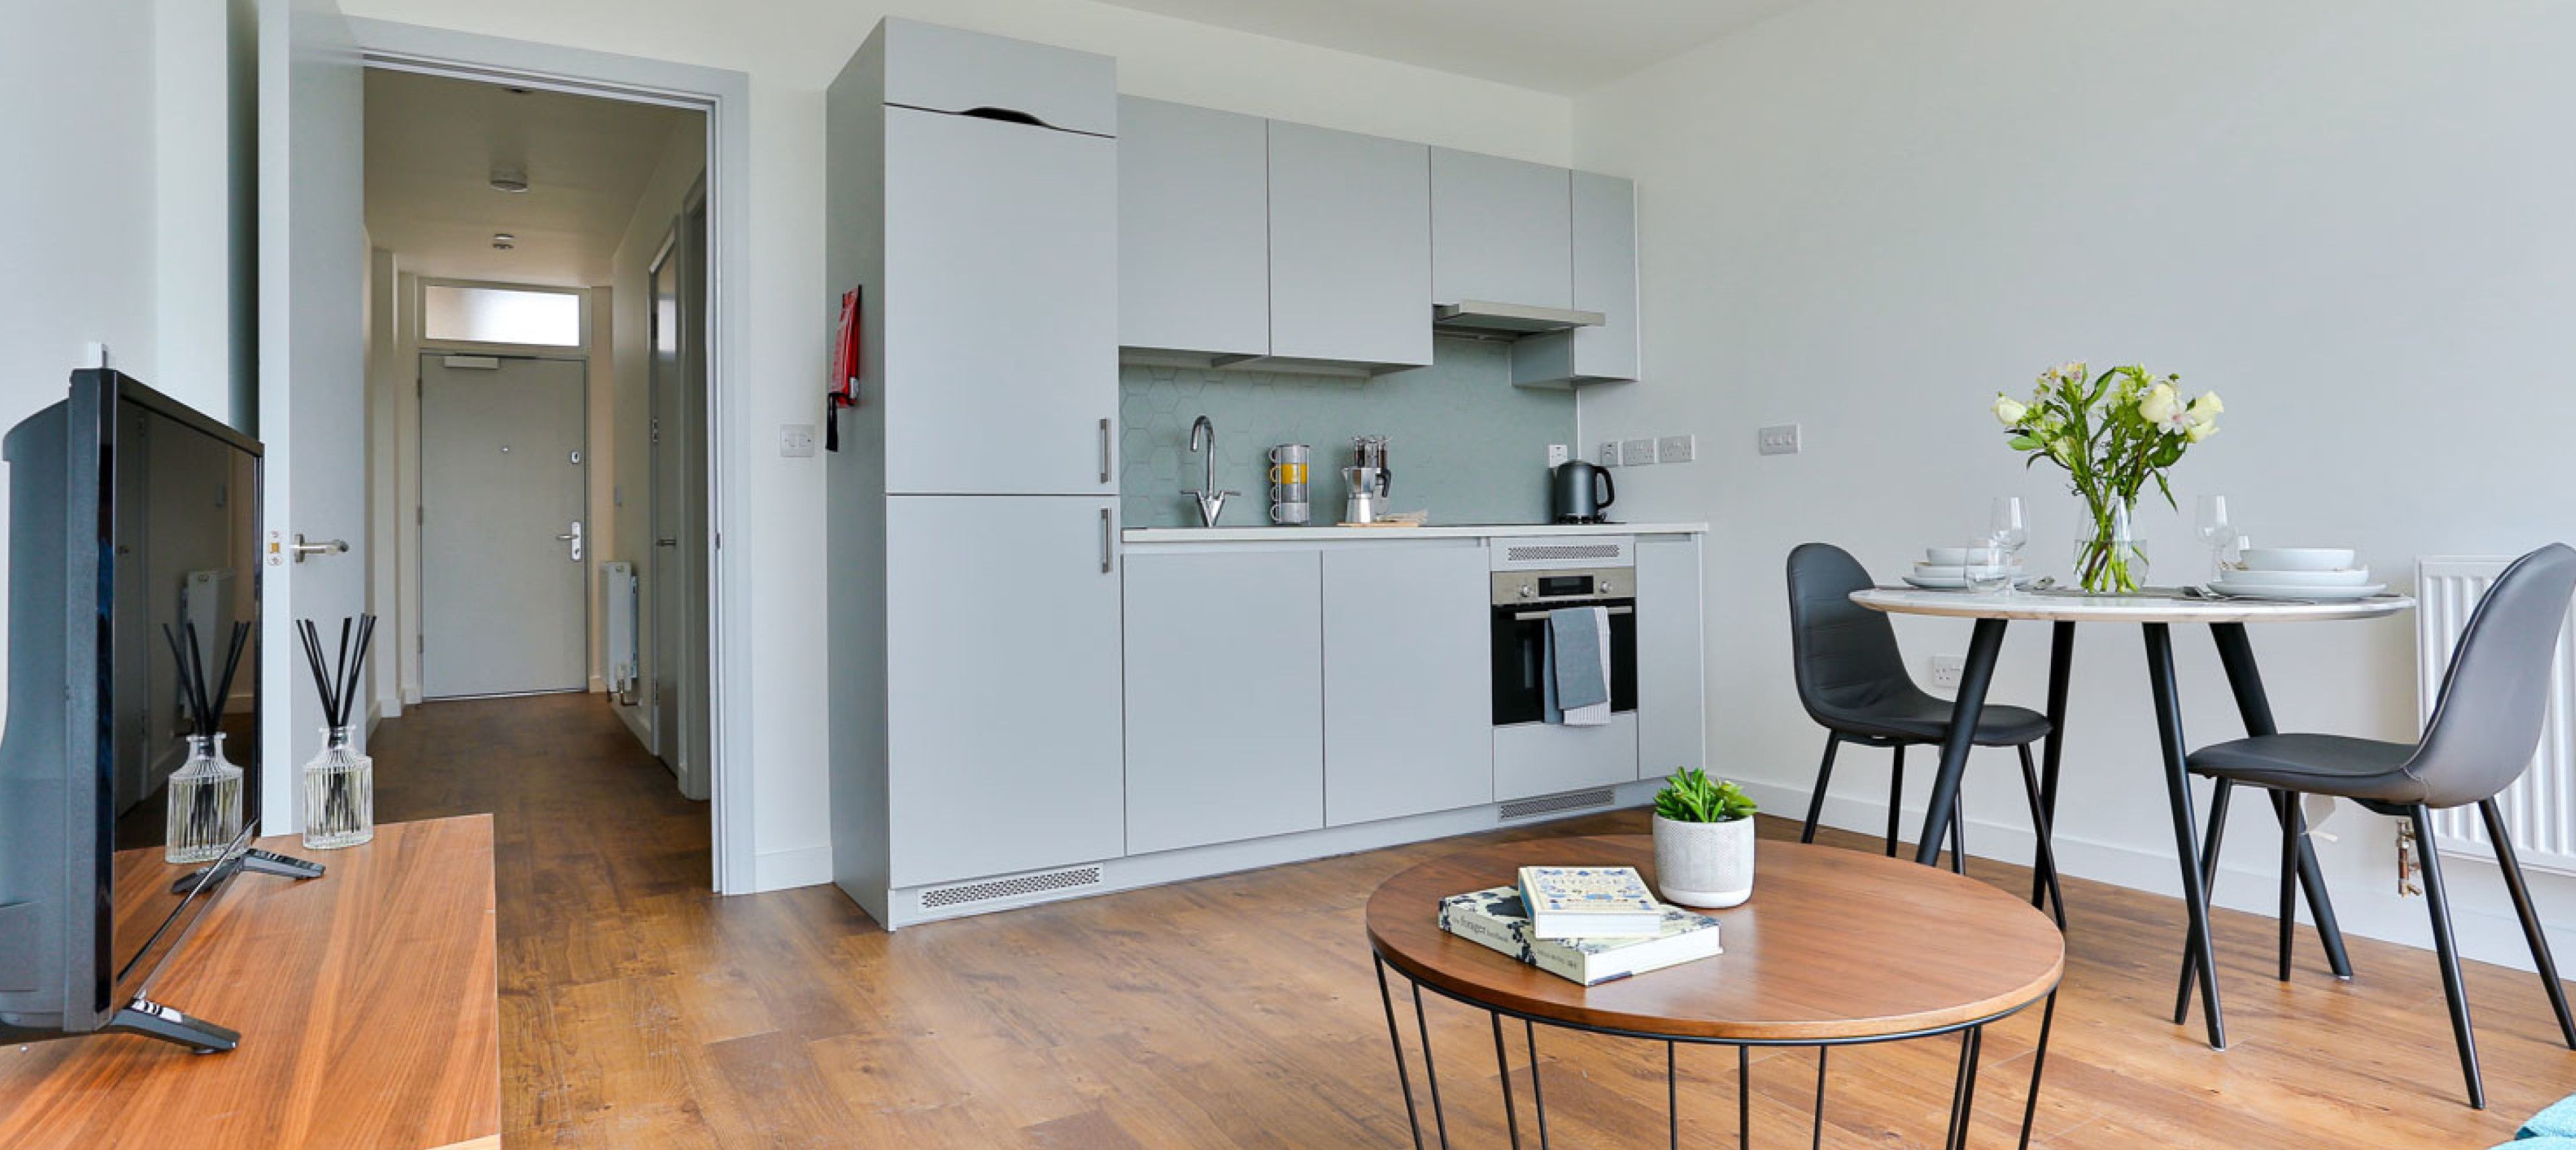 Image of the studio living area at the Clayworks Apartments in North Acton